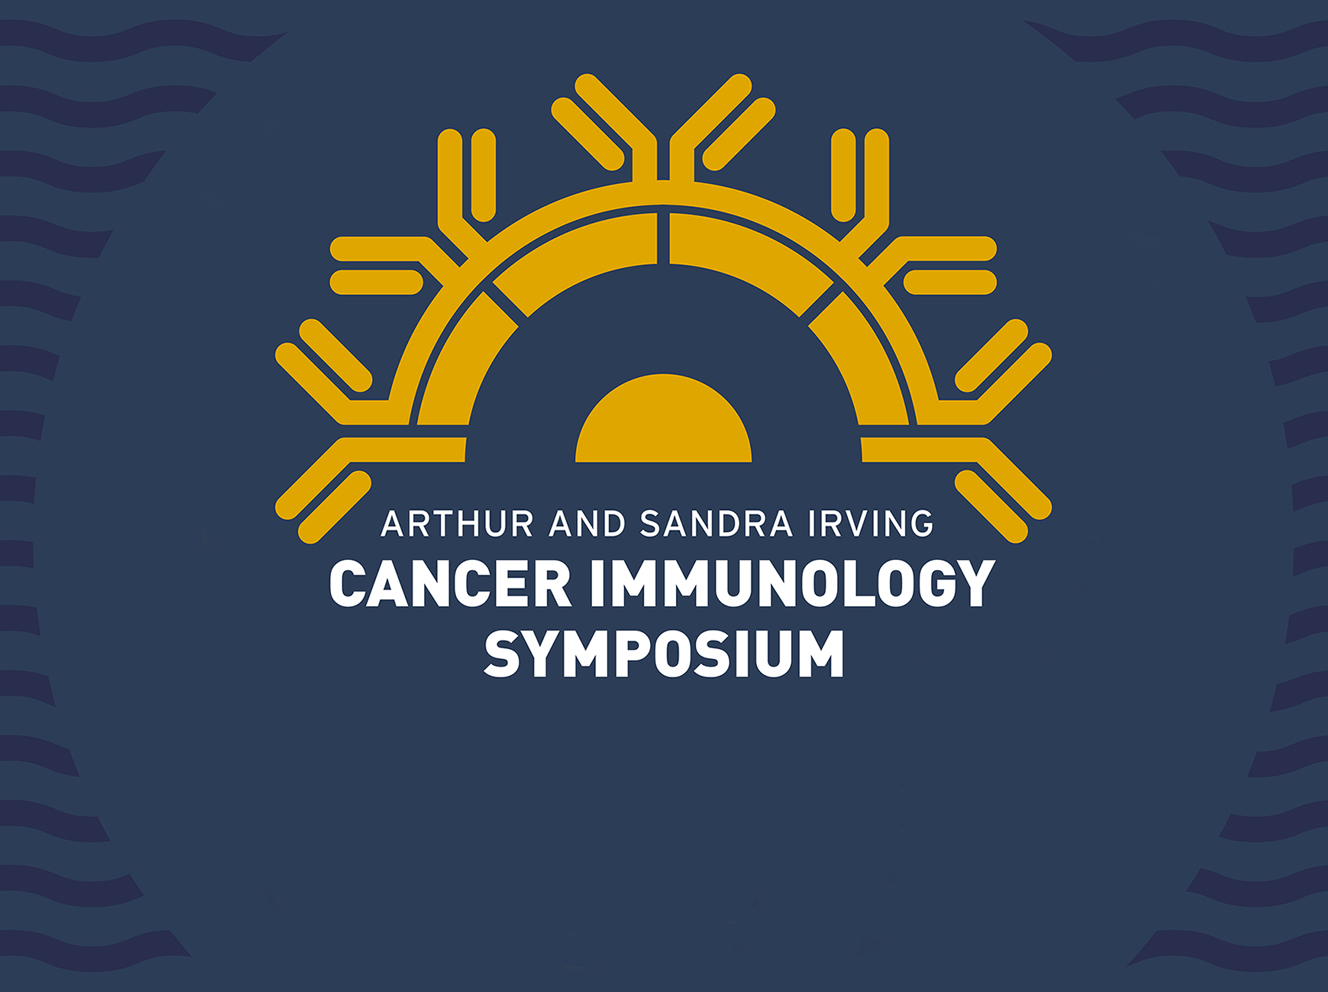 Mass General Cancer Center to Host the Arthur and Sandra Irving Cancer Immunology Symposium, July 19-21